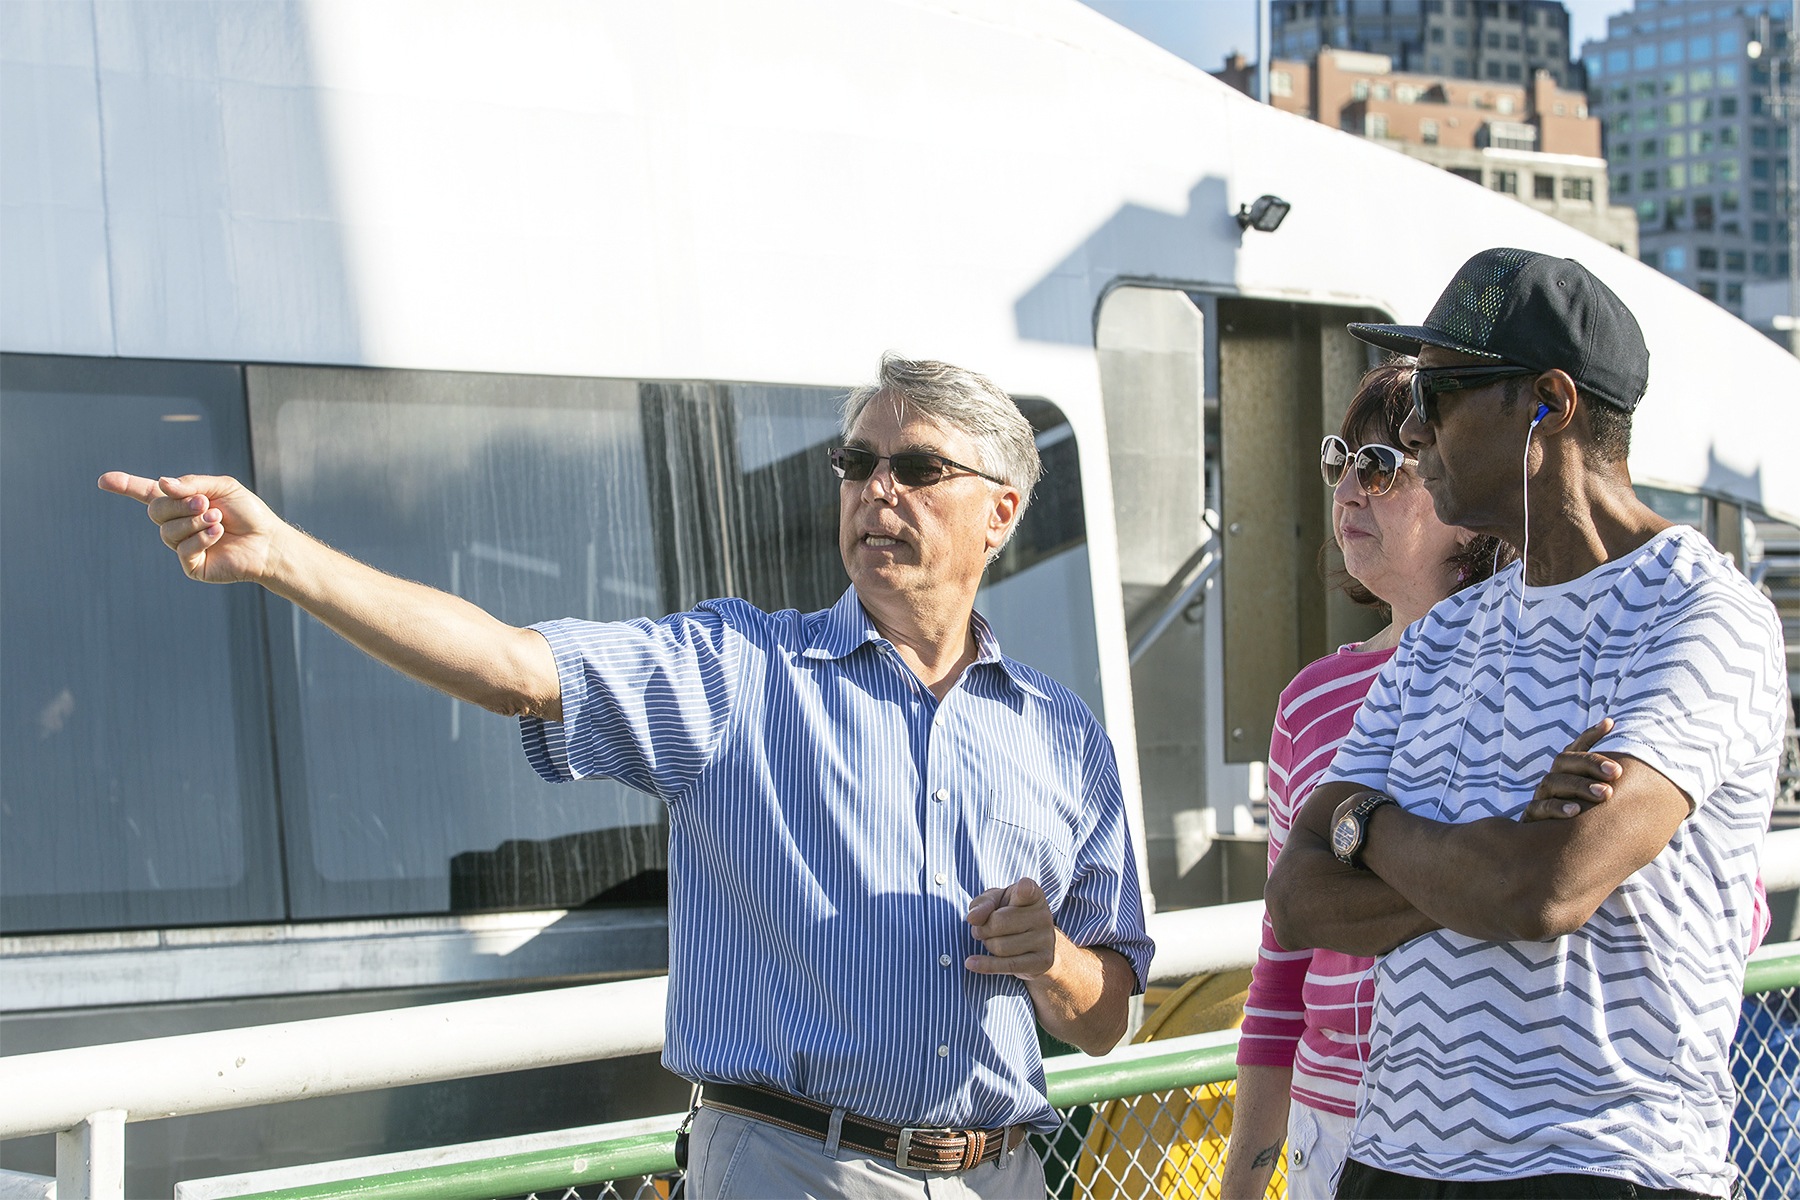 Ned Ahrens/King County PhotoKing County Marine Division Director Paul Brodeur talks to pedestrians in Seattle about the division’s water taxi service. The levy that funds the service is expiring this year and needs to be not just renewed